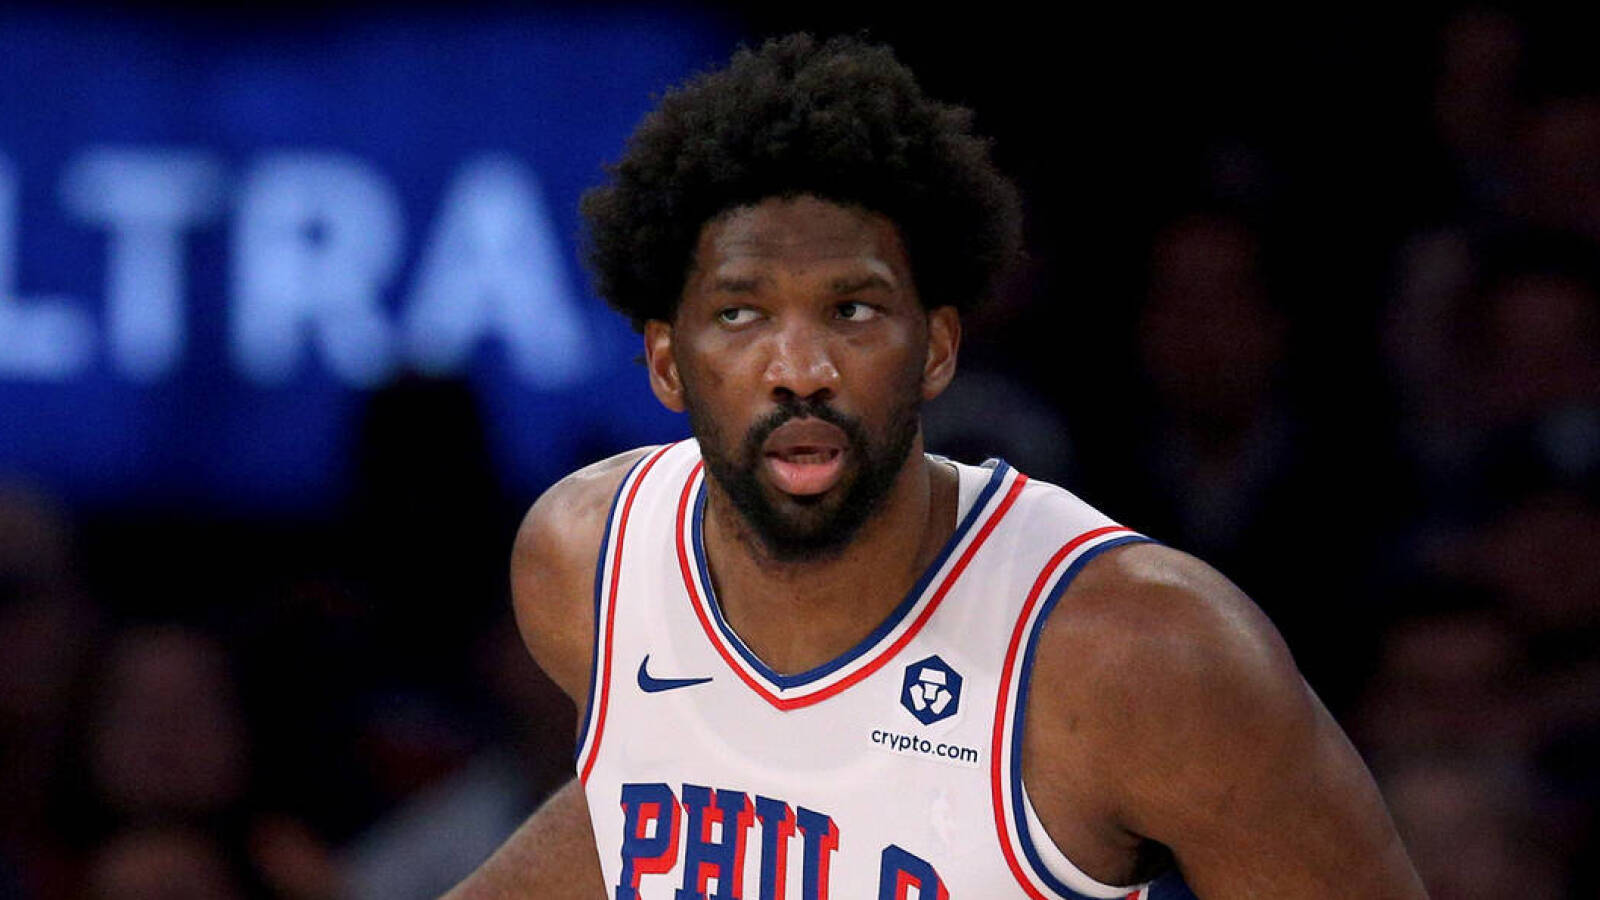 Knicks legend rips 76ers' Joel Embiid for 'crying too much'